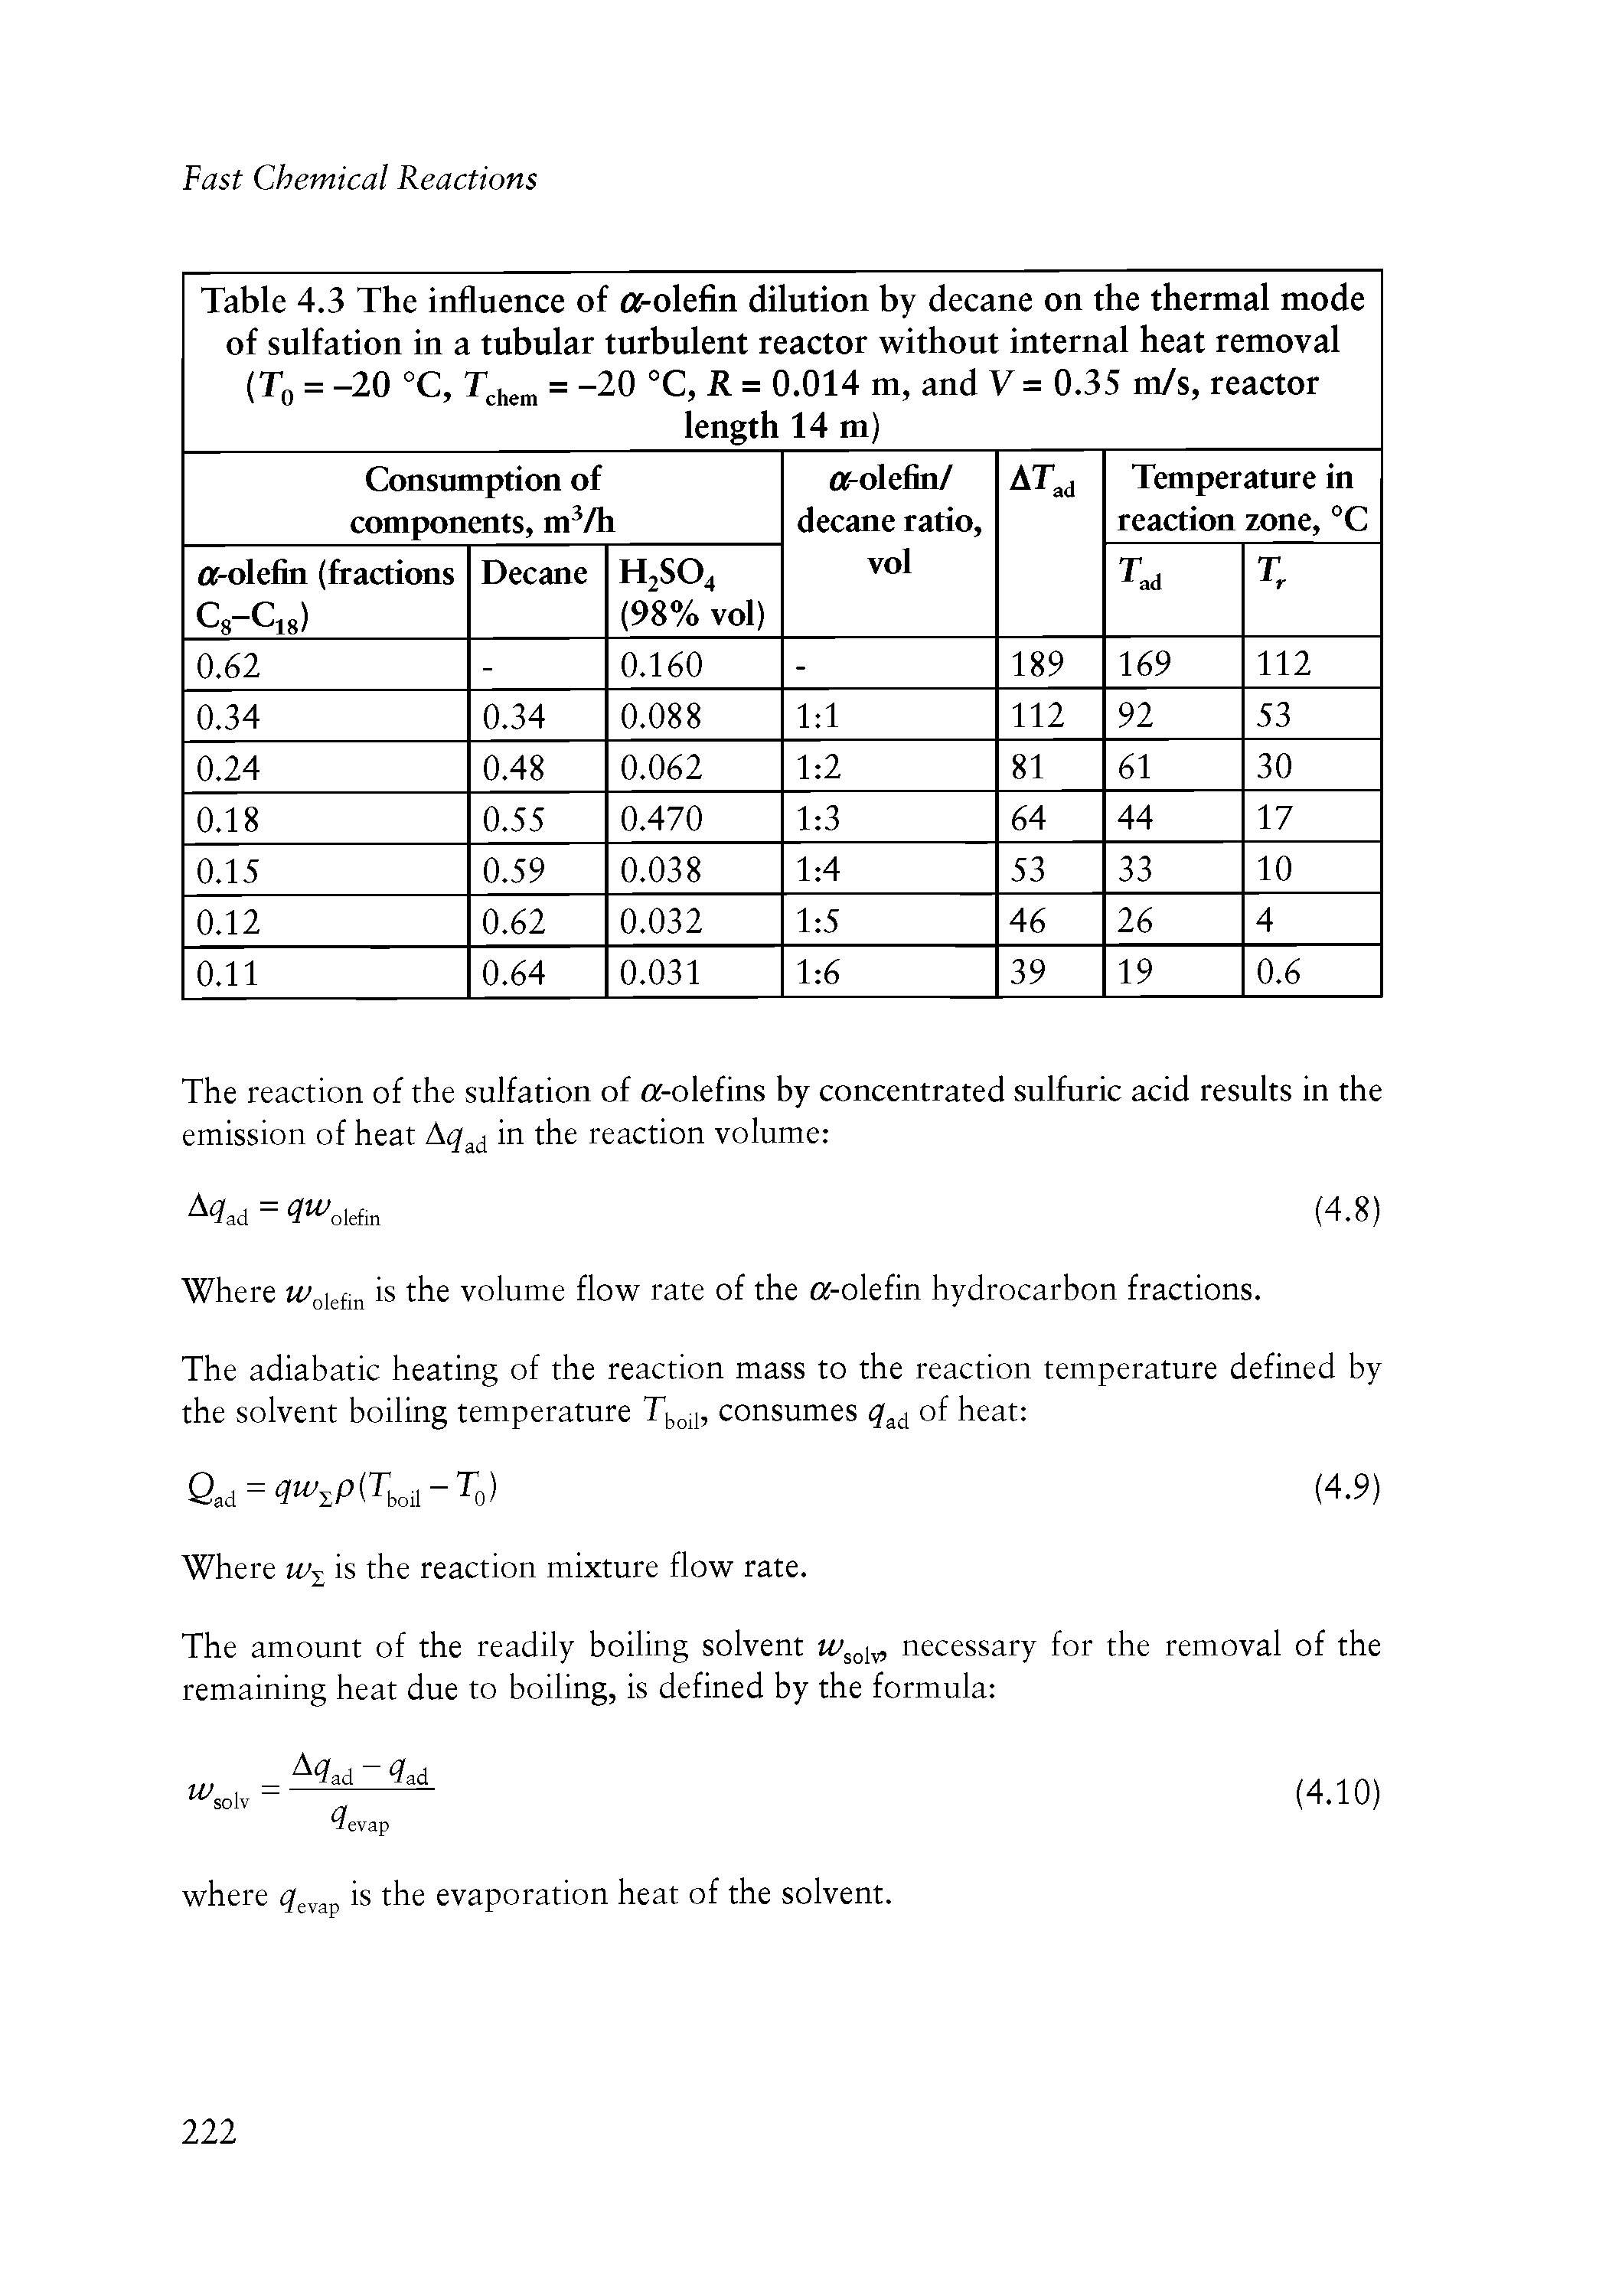 Table 4.3 The influence of tar-olefin dilution by decane on the thermal mode of sulfation in a tubular turbulent reactor without internal heat removal (Tq = -20 °C, T hem 20 °C, R = 0.014 m, and V = 0.35 m/s, reactor length 14 m) ...